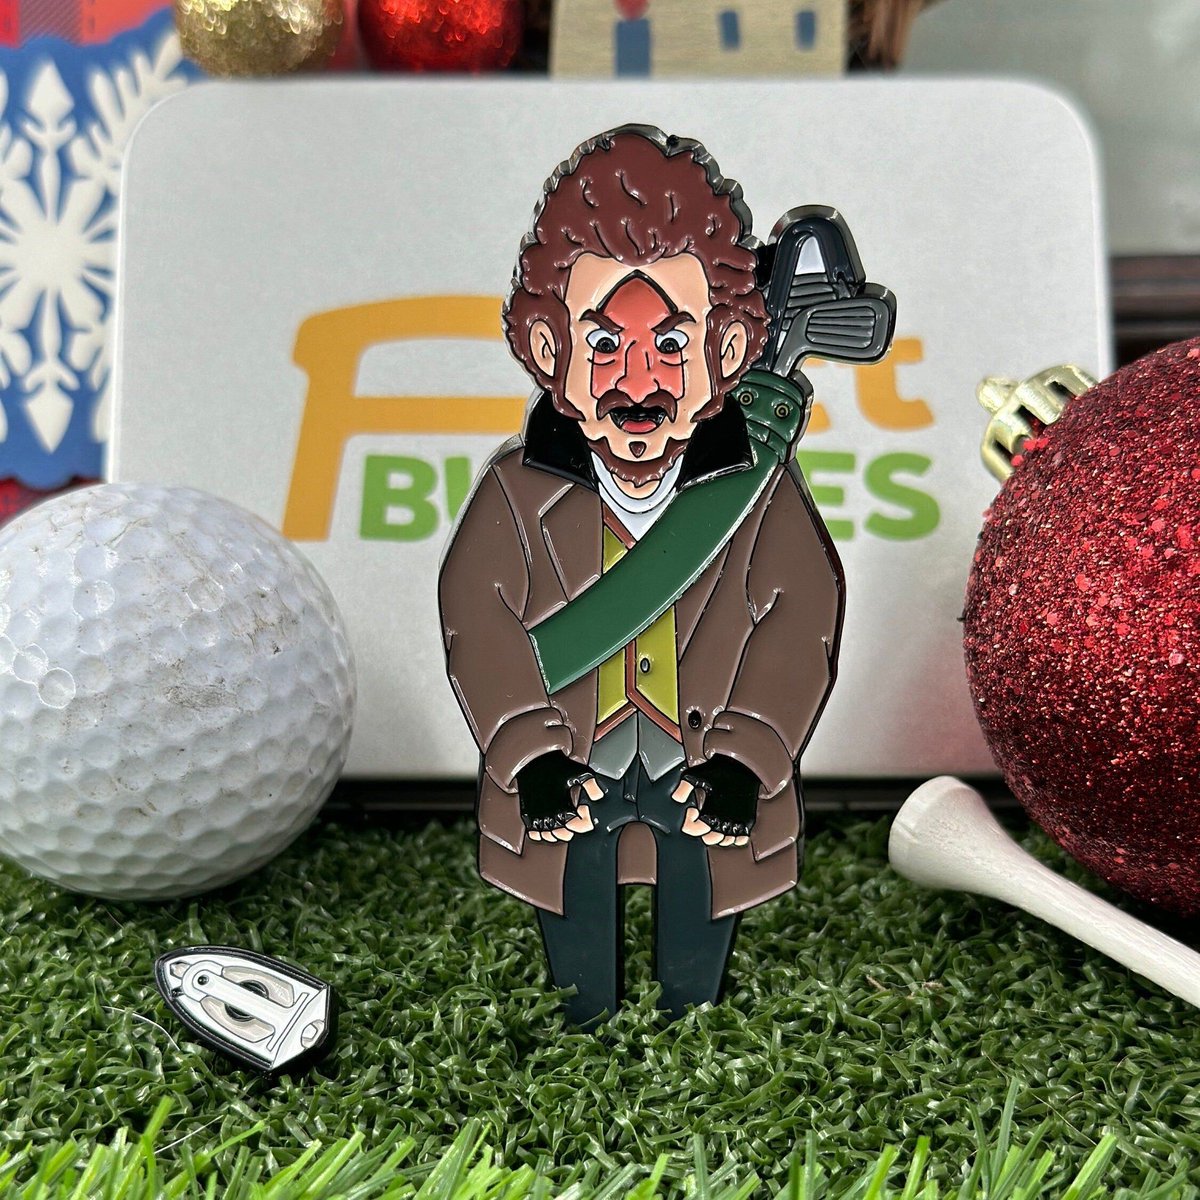 😲💥Level up your golf style with the exclusive 'Home Alone Ball Marker And Divot Tool Gift Set'. Don't miss this chance to stand out on the course. Order now, while supplies last! 💥⛳ Check out buff.ly/3RJsrCp #GolfGear #HomeAloneGiftSet #golf #golfgift #golffer